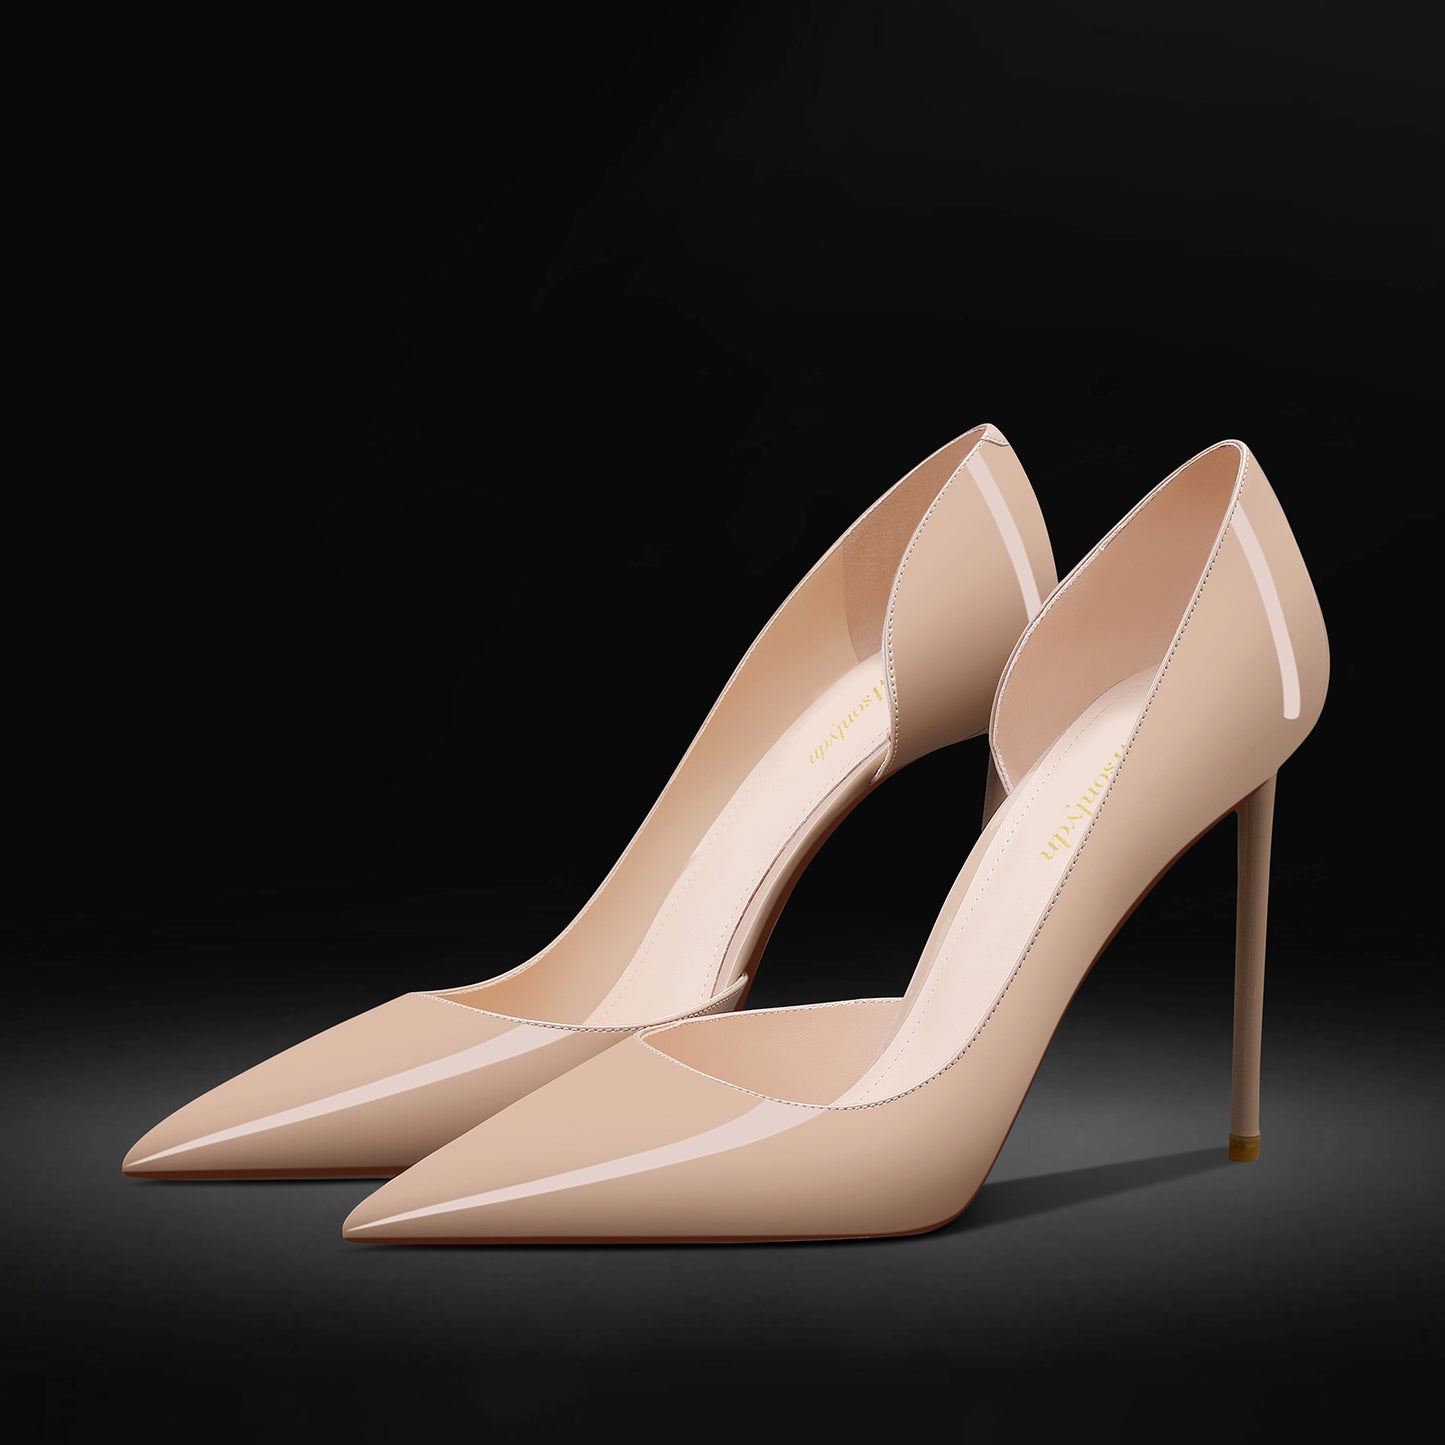 Women's Leather Stiletto Heels and Pumps, Comfortable Sexy